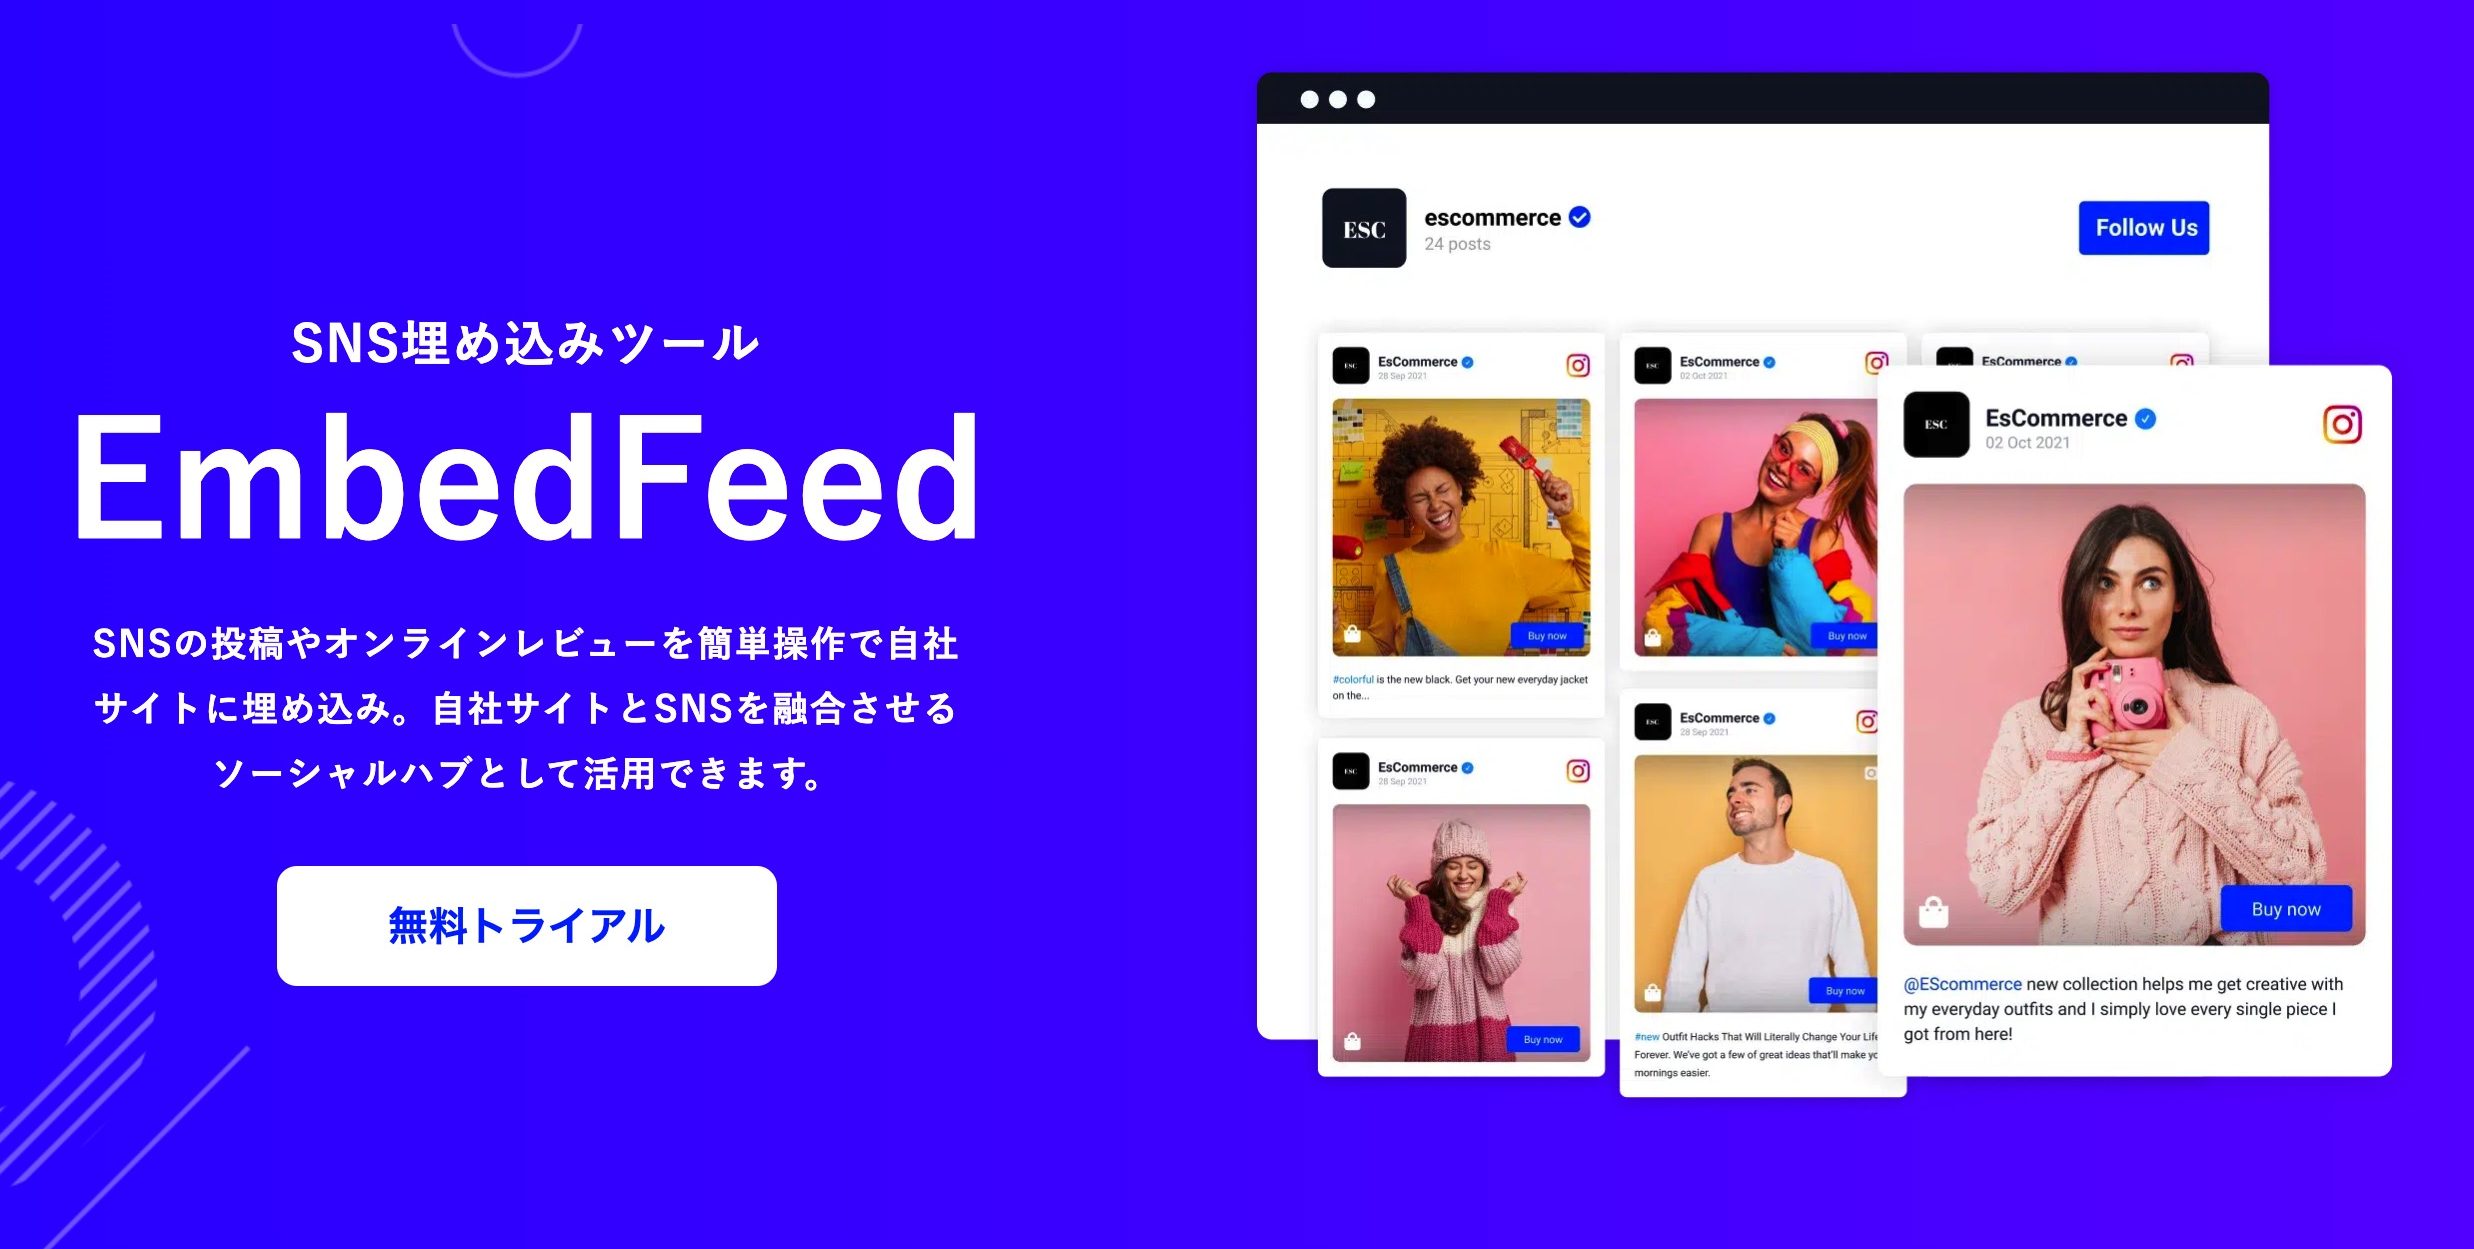 EmbedFeed｜SNS投稿 埋め込みツール